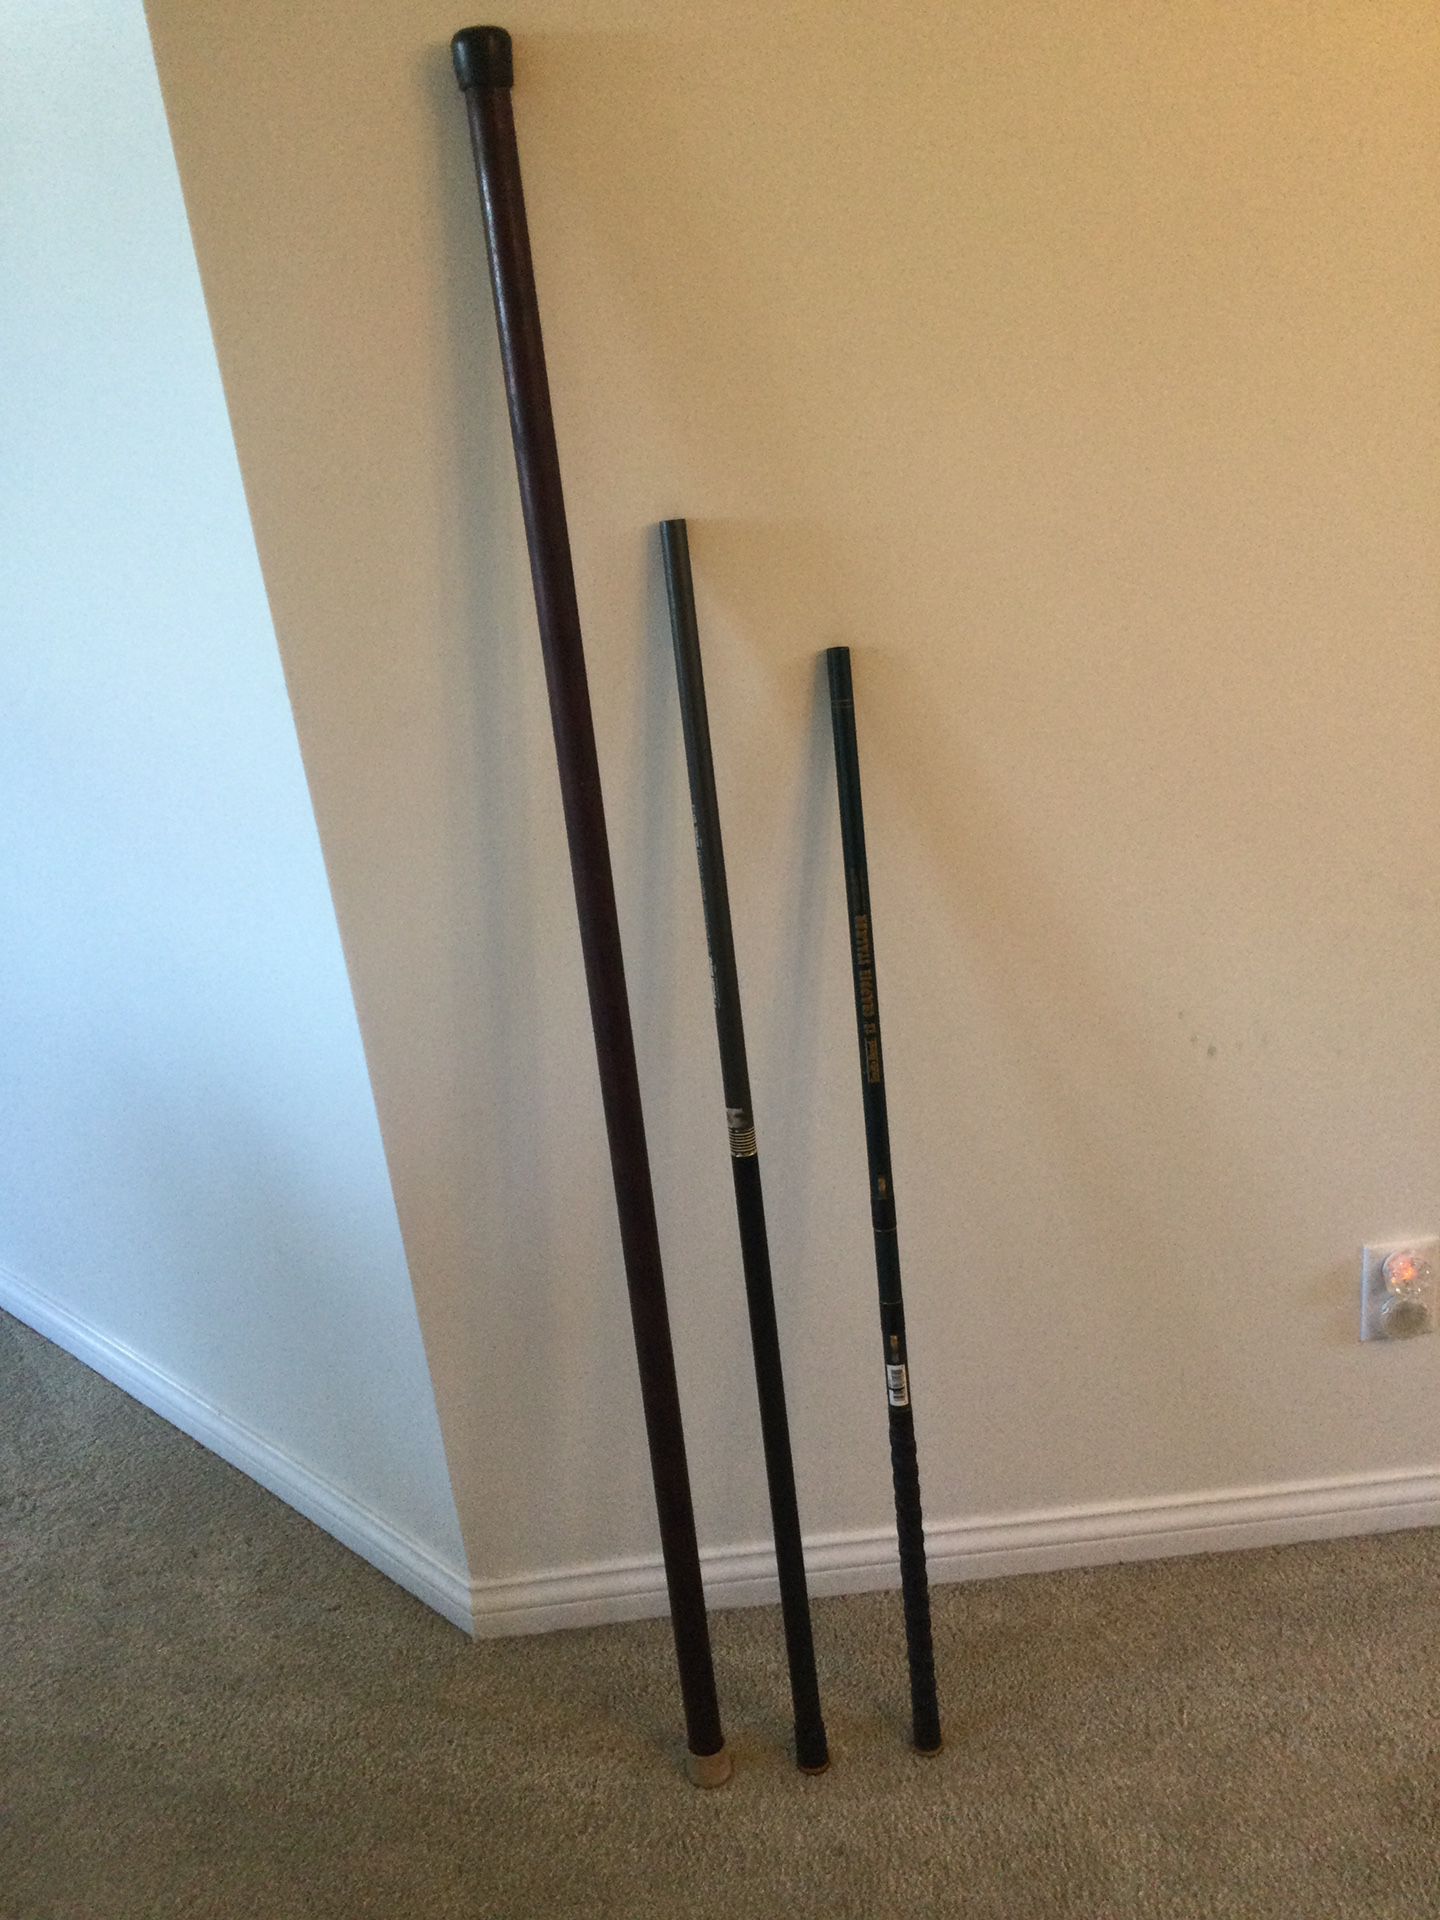 EXTENDABLE FISHING POLES. 12’, 13’ & 20’ POLES. ALL 3 FOR $25.00.